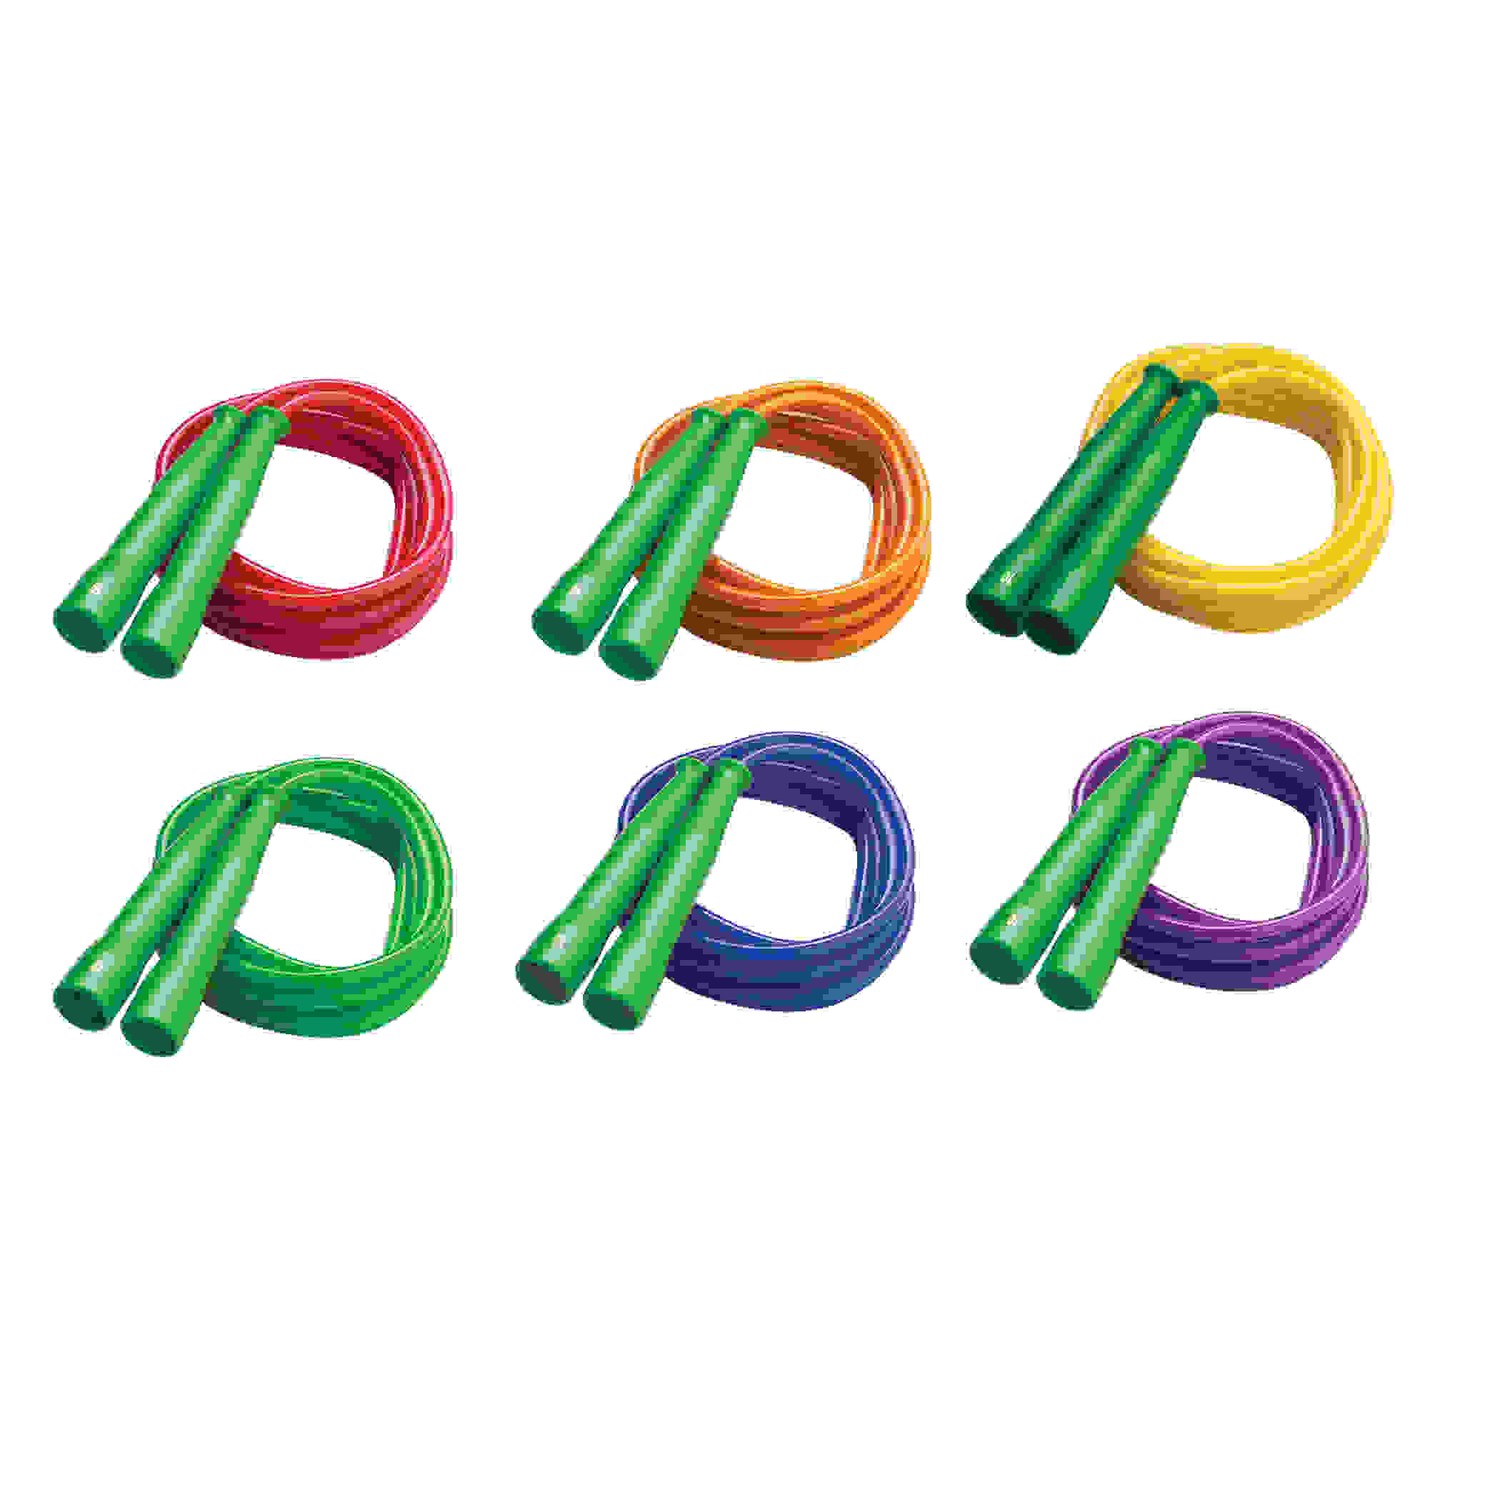 Licorice Speed Jump Rope, 10' with Green Handles, Pack of 6